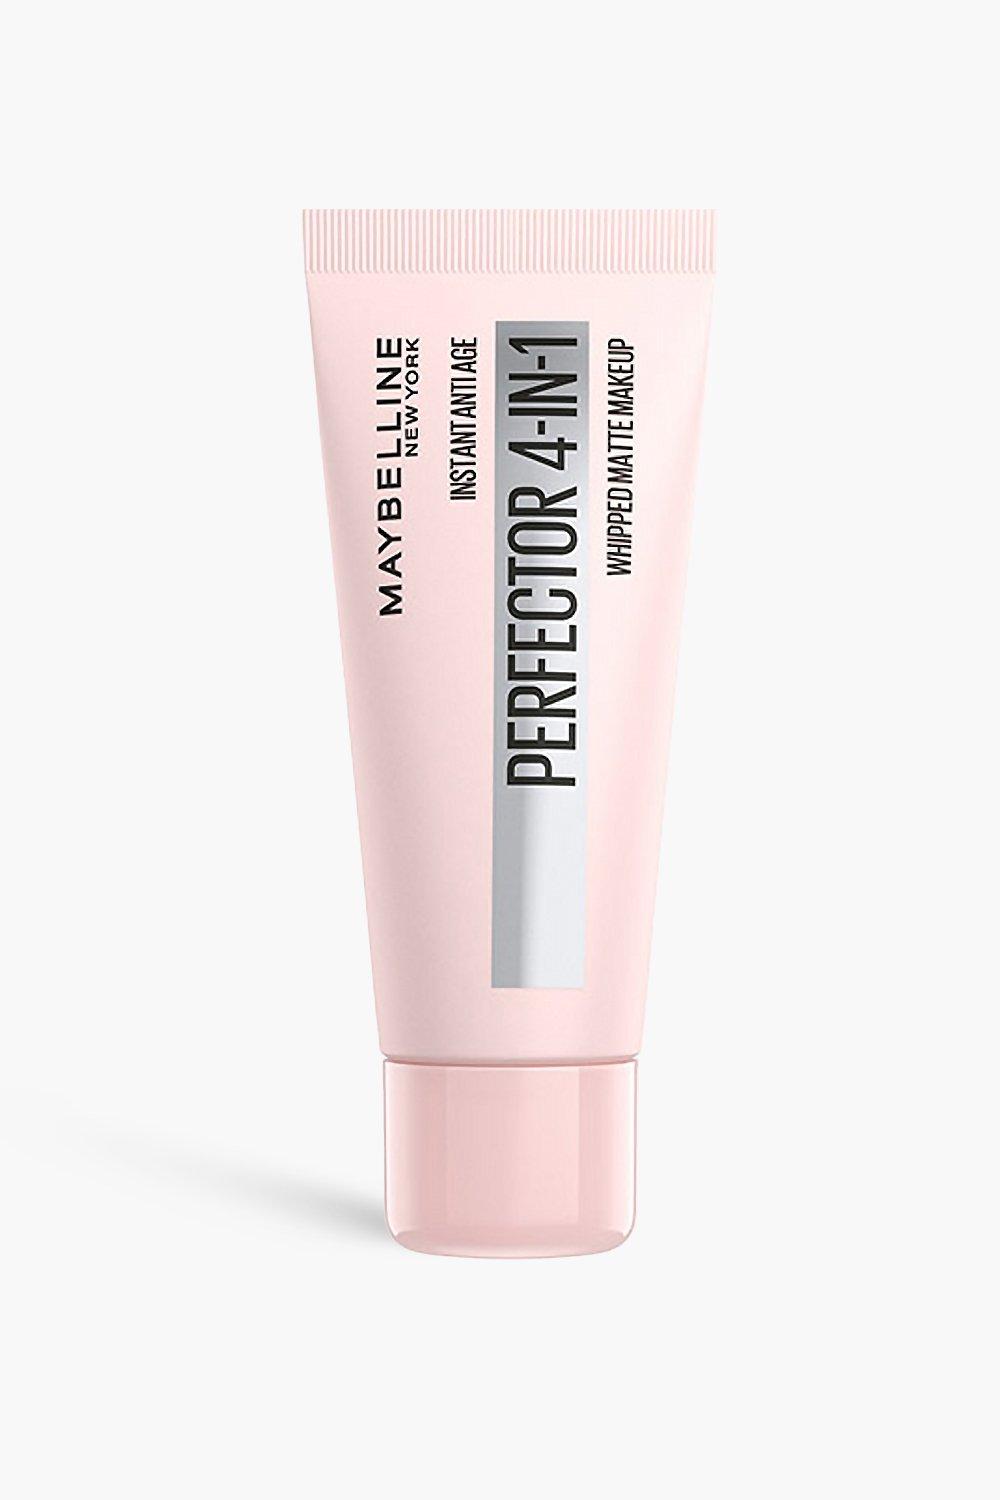 Maybelline Instant Age Rewind Instant Perfector 4 in 1, Tan